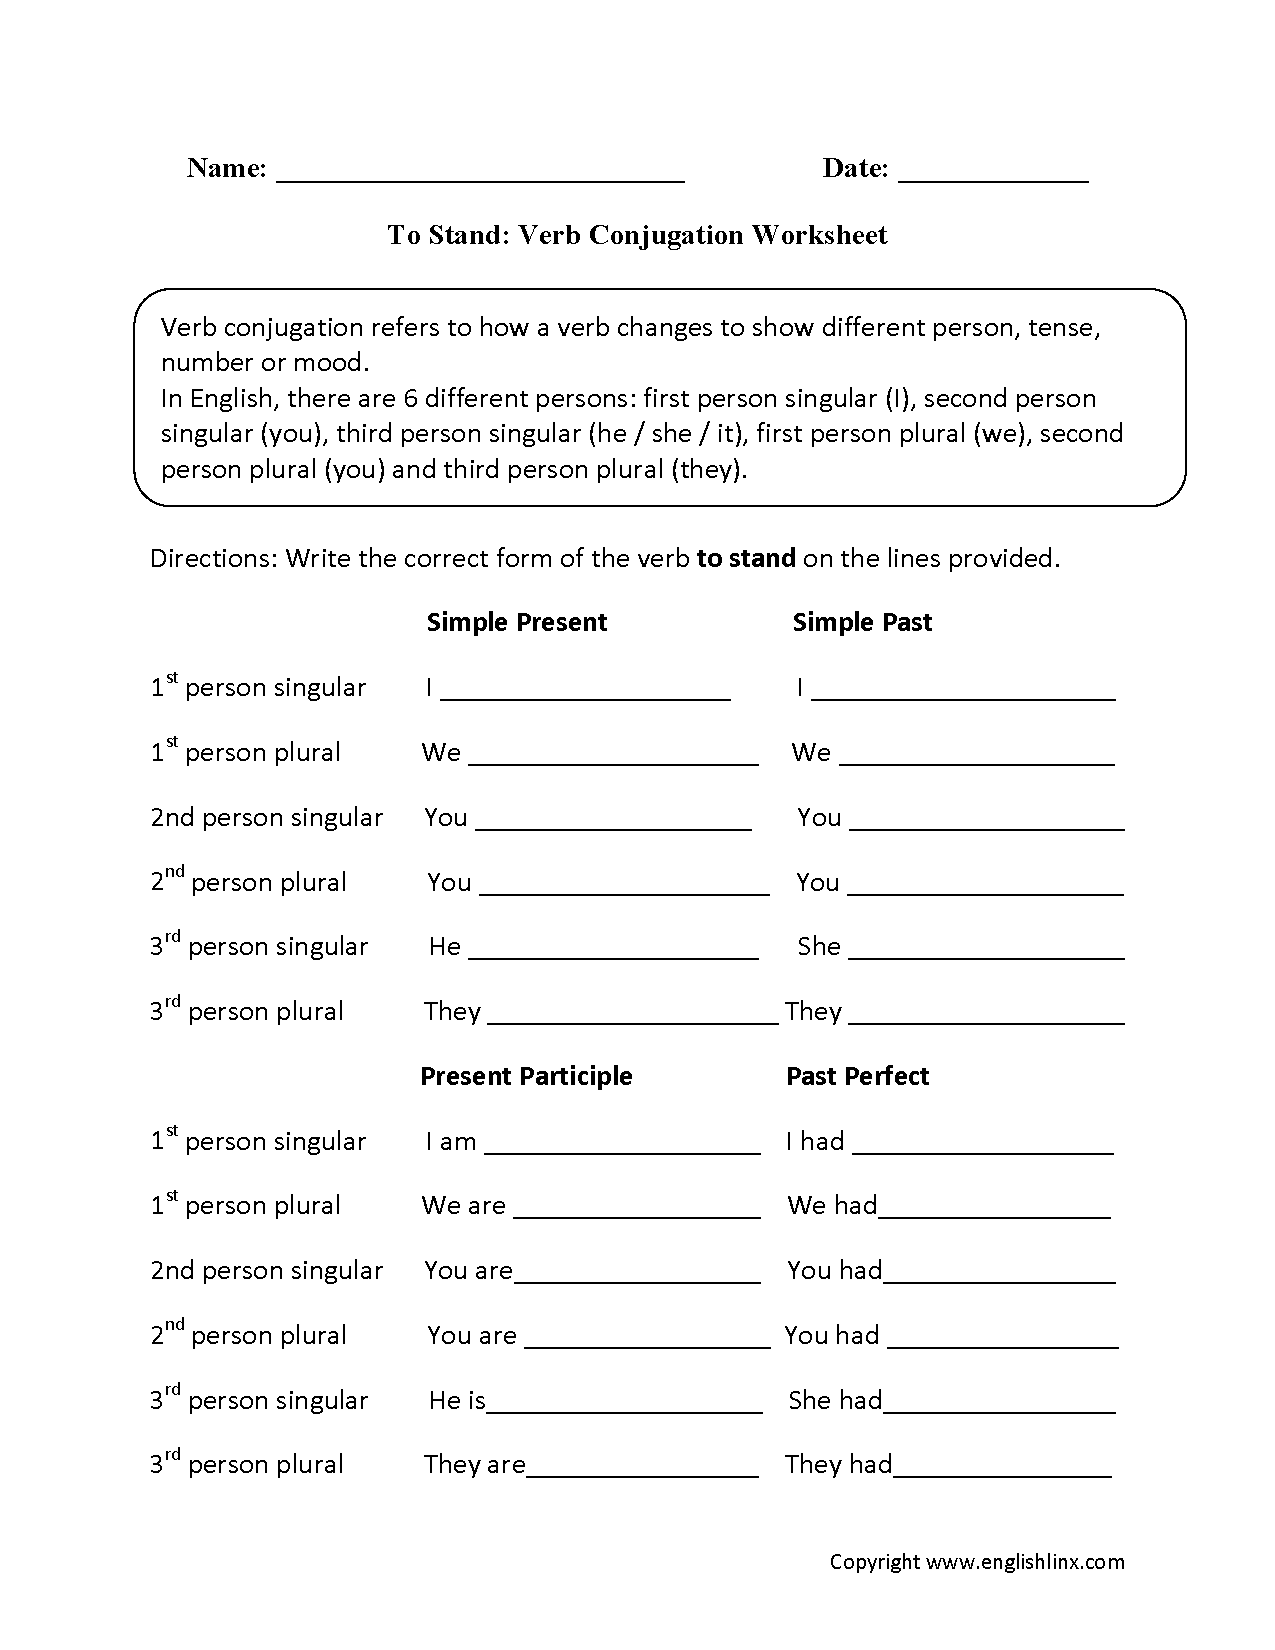 To Stand Verb Conjugation Worksheets